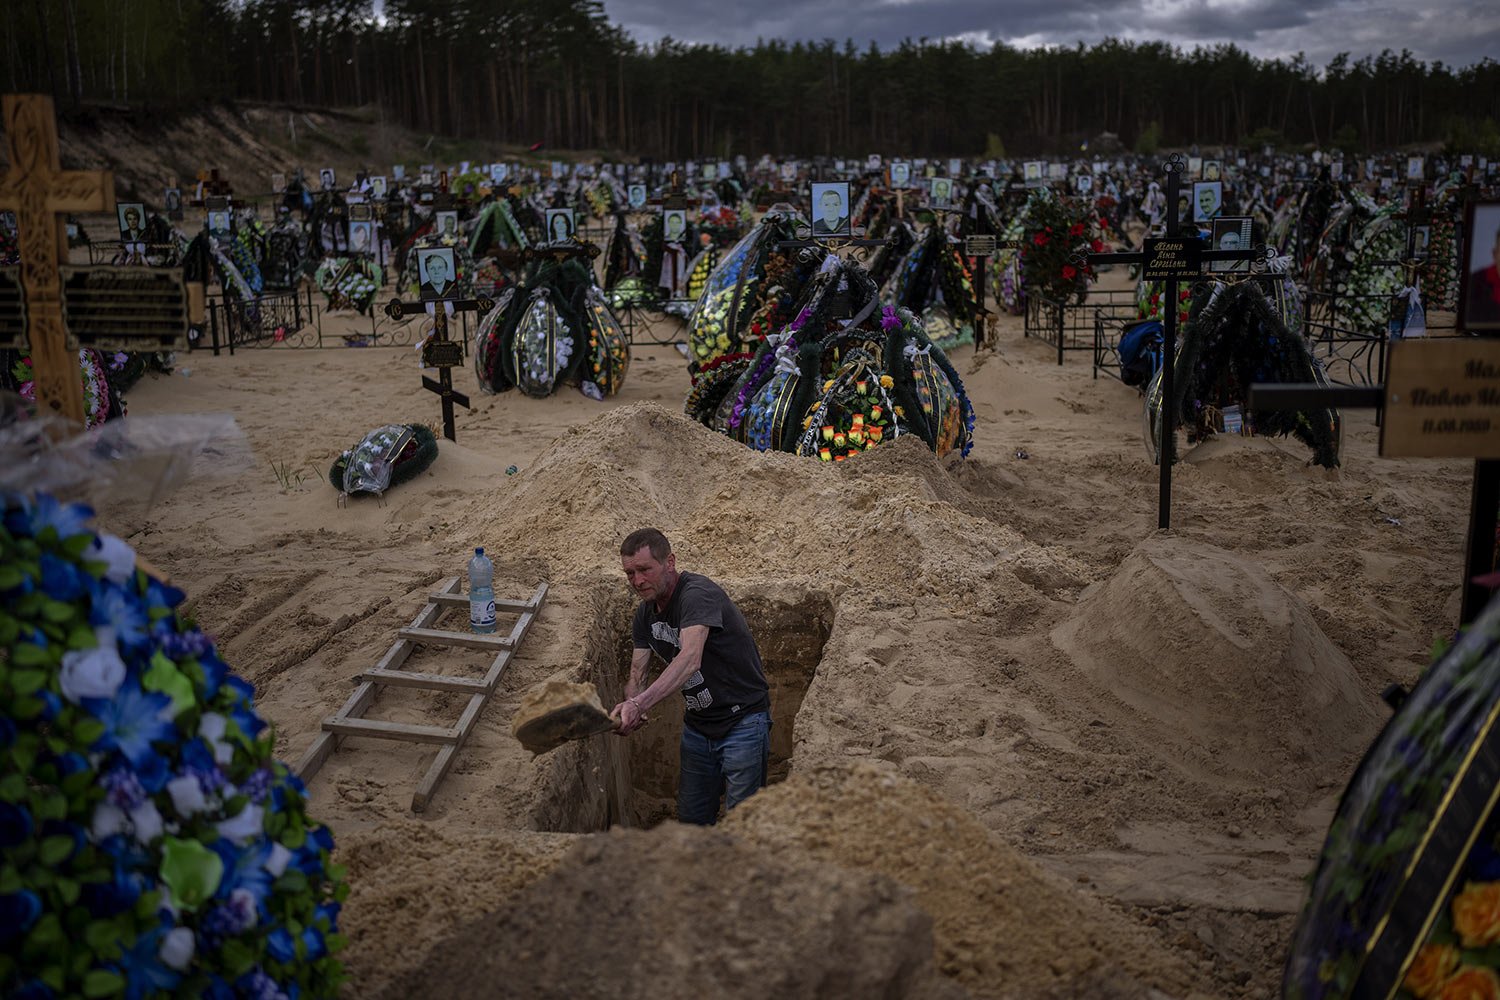  Gravedigger Alexander digs a grave at the cemetery in Irpin on the outskirts of Kyiv, Wednesday, April 27, 2022. (AP Photo/Emilio Morenatti) 